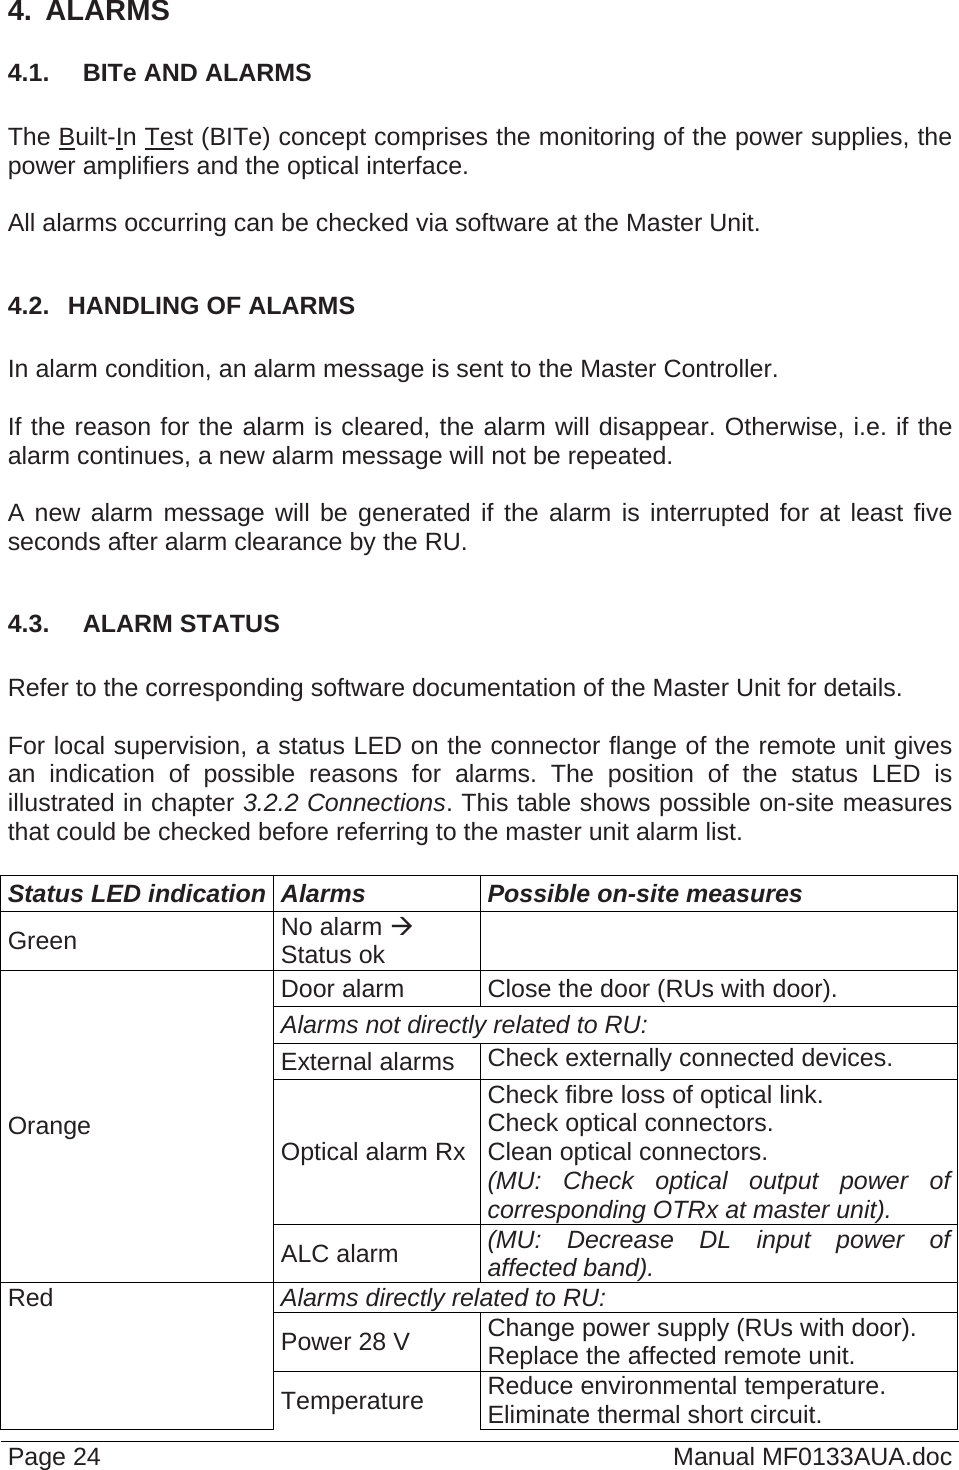  Page 24  Manual MF0133AUA.doc 4.  ALARMS 4.1.  BITe AND ALARMS  The Built-In Test (BITe) concept comprises the monitoring of the power supplies, the power amplifiers and the optical interface.  All alarms occurring can be checked via software at the Master Unit.  4.2.  HANDLING OF ALARMS  In alarm condition, an alarm message is sent to the Master Controller.  If the reason for the alarm is cleared, the alarm will disappear. Otherwise, i.e. if the alarm continues, a new alarm message will not be repeated.  A new alarm message will be generated if the alarm is interrupted for at least five seconds after alarm clearance by the RU.  4.3.  ALARM STATUS  Refer to the corresponding software documentation of the Master Unit for details.  For local supervision, a status LED on the connector flange of the remote unit gives an indication of possible reasons for alarms. The position of the status LED is illustrated in chapter 3.2.2 Connections. This table shows possible on-site measures that could be checked before referring to the master unit alarm list.  Status LED indication  Alarms  Possible on-site measures Green  No alarm  Status ok   Door alarm  Close the door (RUs with door). Alarms not directly related to RU:  External alarms  Check externally connected devices. Optical alarm Rx Check fibre loss of optical link. Check optical connectors. Clean optical connectors. (MU: Check optical output power of corresponding OTRx at master unit). Orange ALC alarm  (MU: Decrease DL input power of affected band). Alarms directly related to RU: Power 28 V  Change power supply (RUs with door). Replace the affected remote unit. Red Temperature  Reduce environmental temperature.  Eliminate thermal short circuit. 